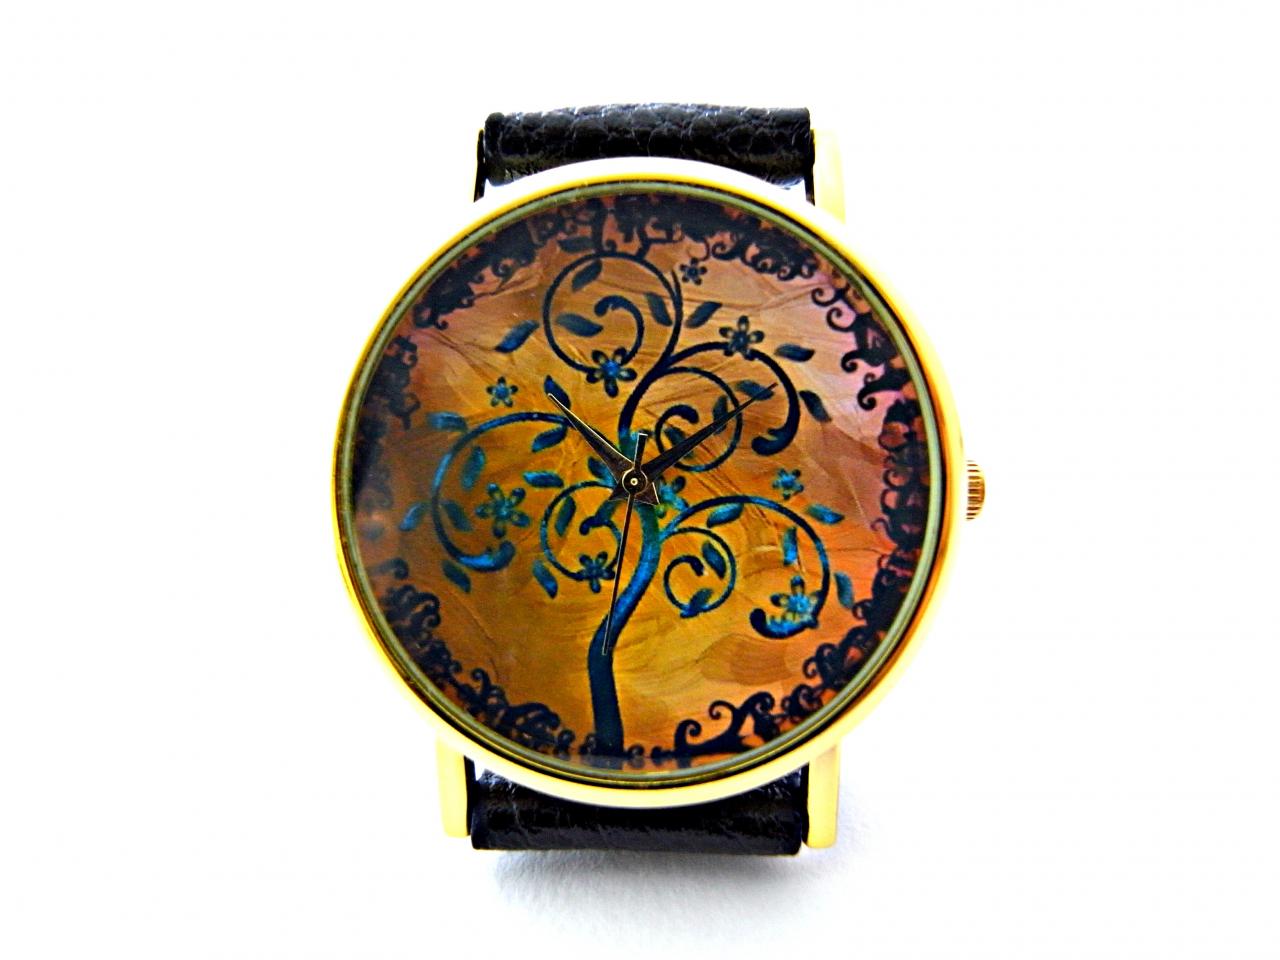 Tree Leather Wrist Watches, Woman Man Lady Unisex Watch, Genuine Leather Handmade Unique Watch #4